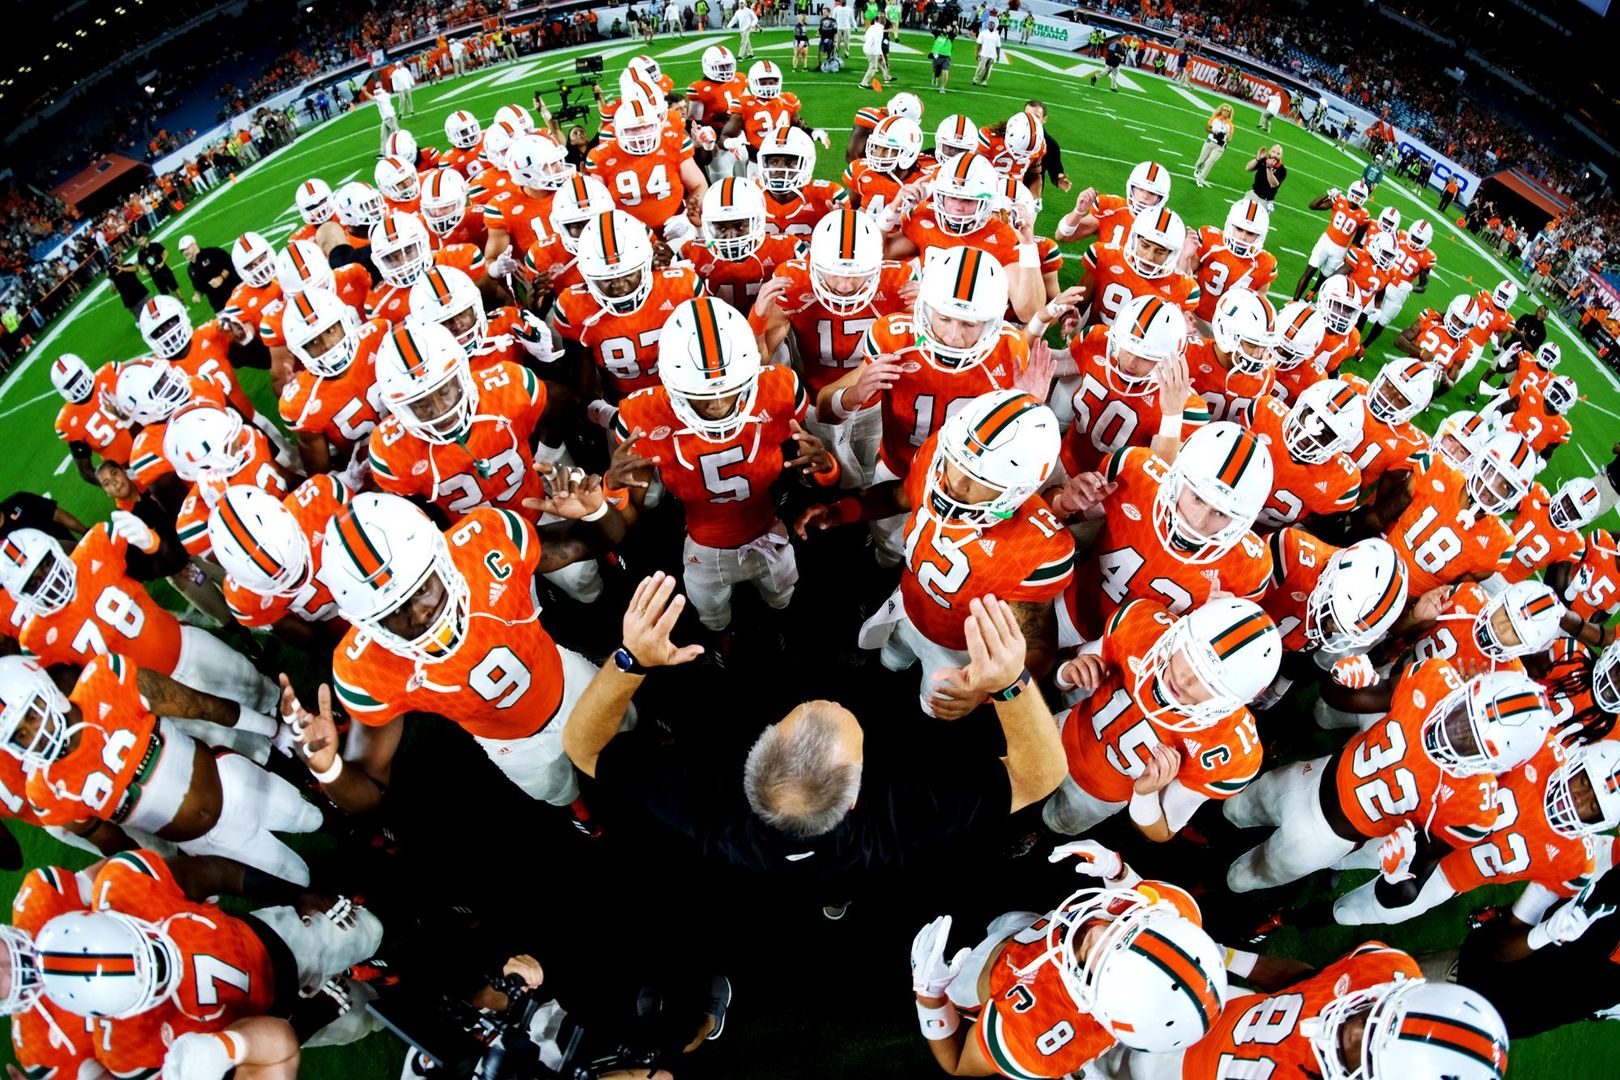 No. 3 Canes Focused on Virginia, Not Rankings